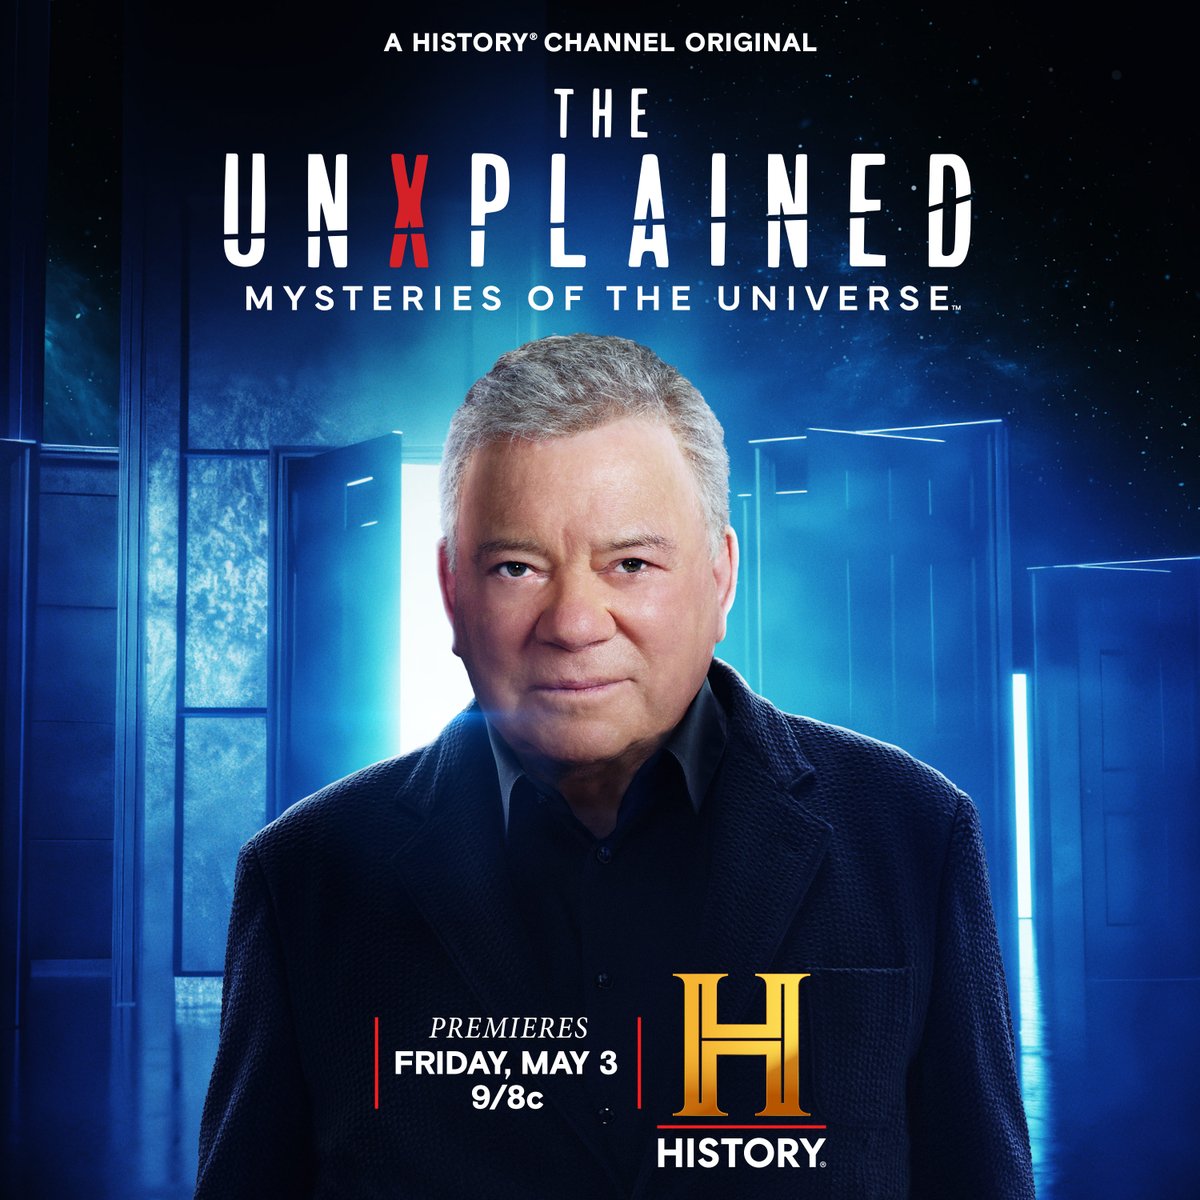 Get ready for a thrilling look into the truth behind the most bizarre, strange and mysterious events that have happened throughout history on #TheUnXplained: Mysteries of The Universe, with @WilliamShatner, May 3nd at 9/8c on The History Channel.